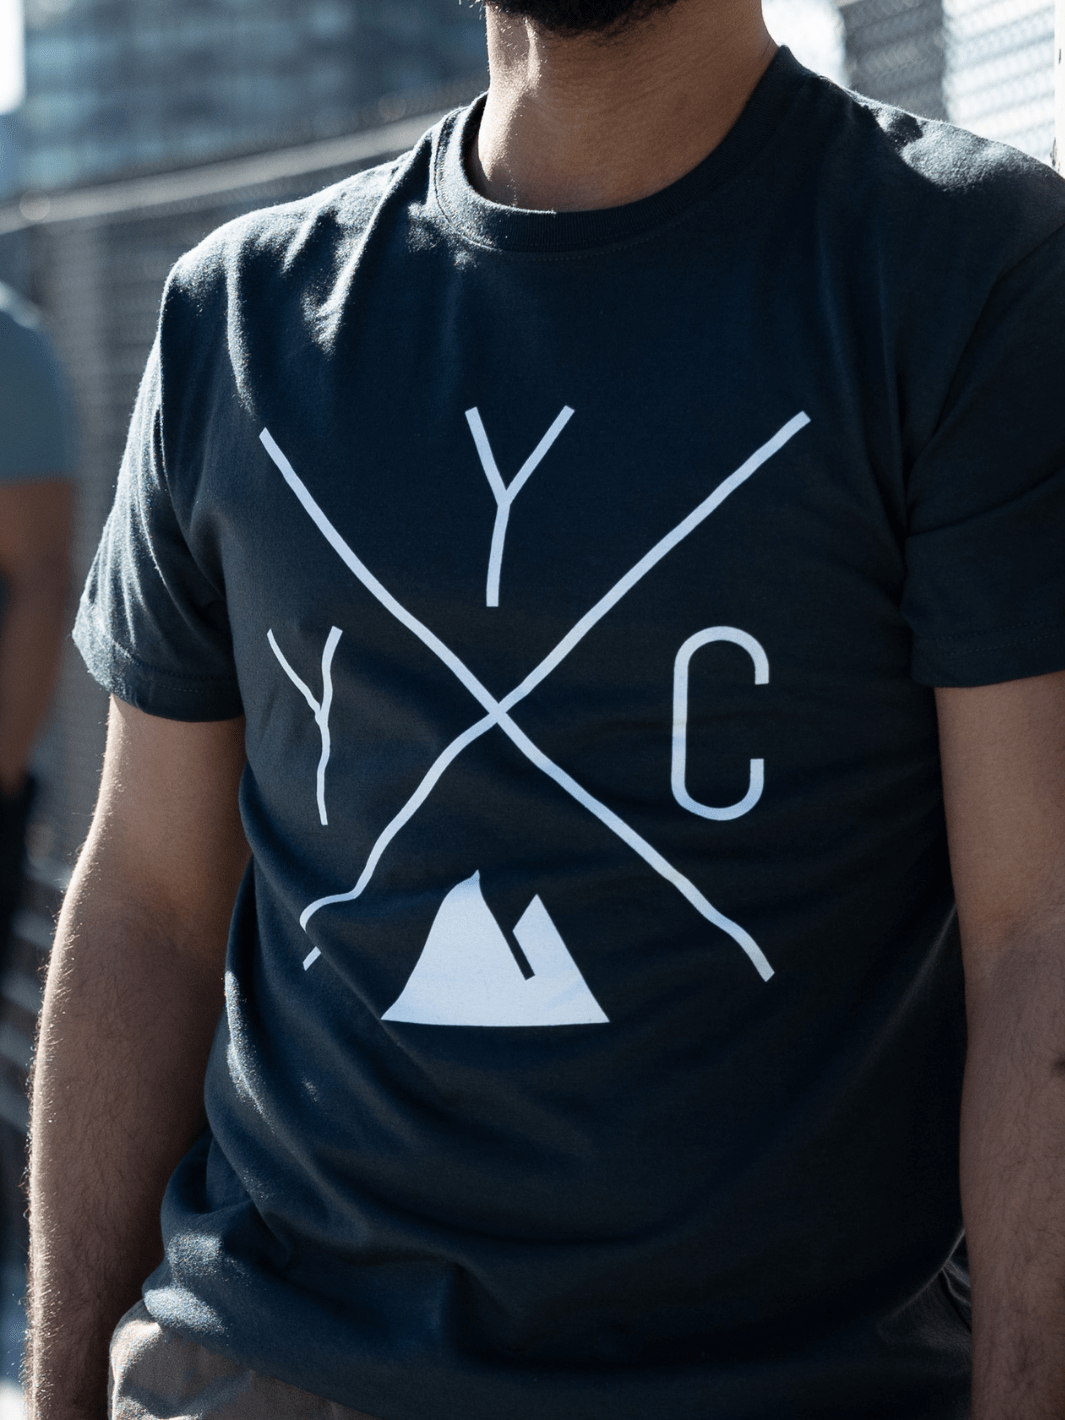 YYC T-Shirt - Charcoal - Local Laundry